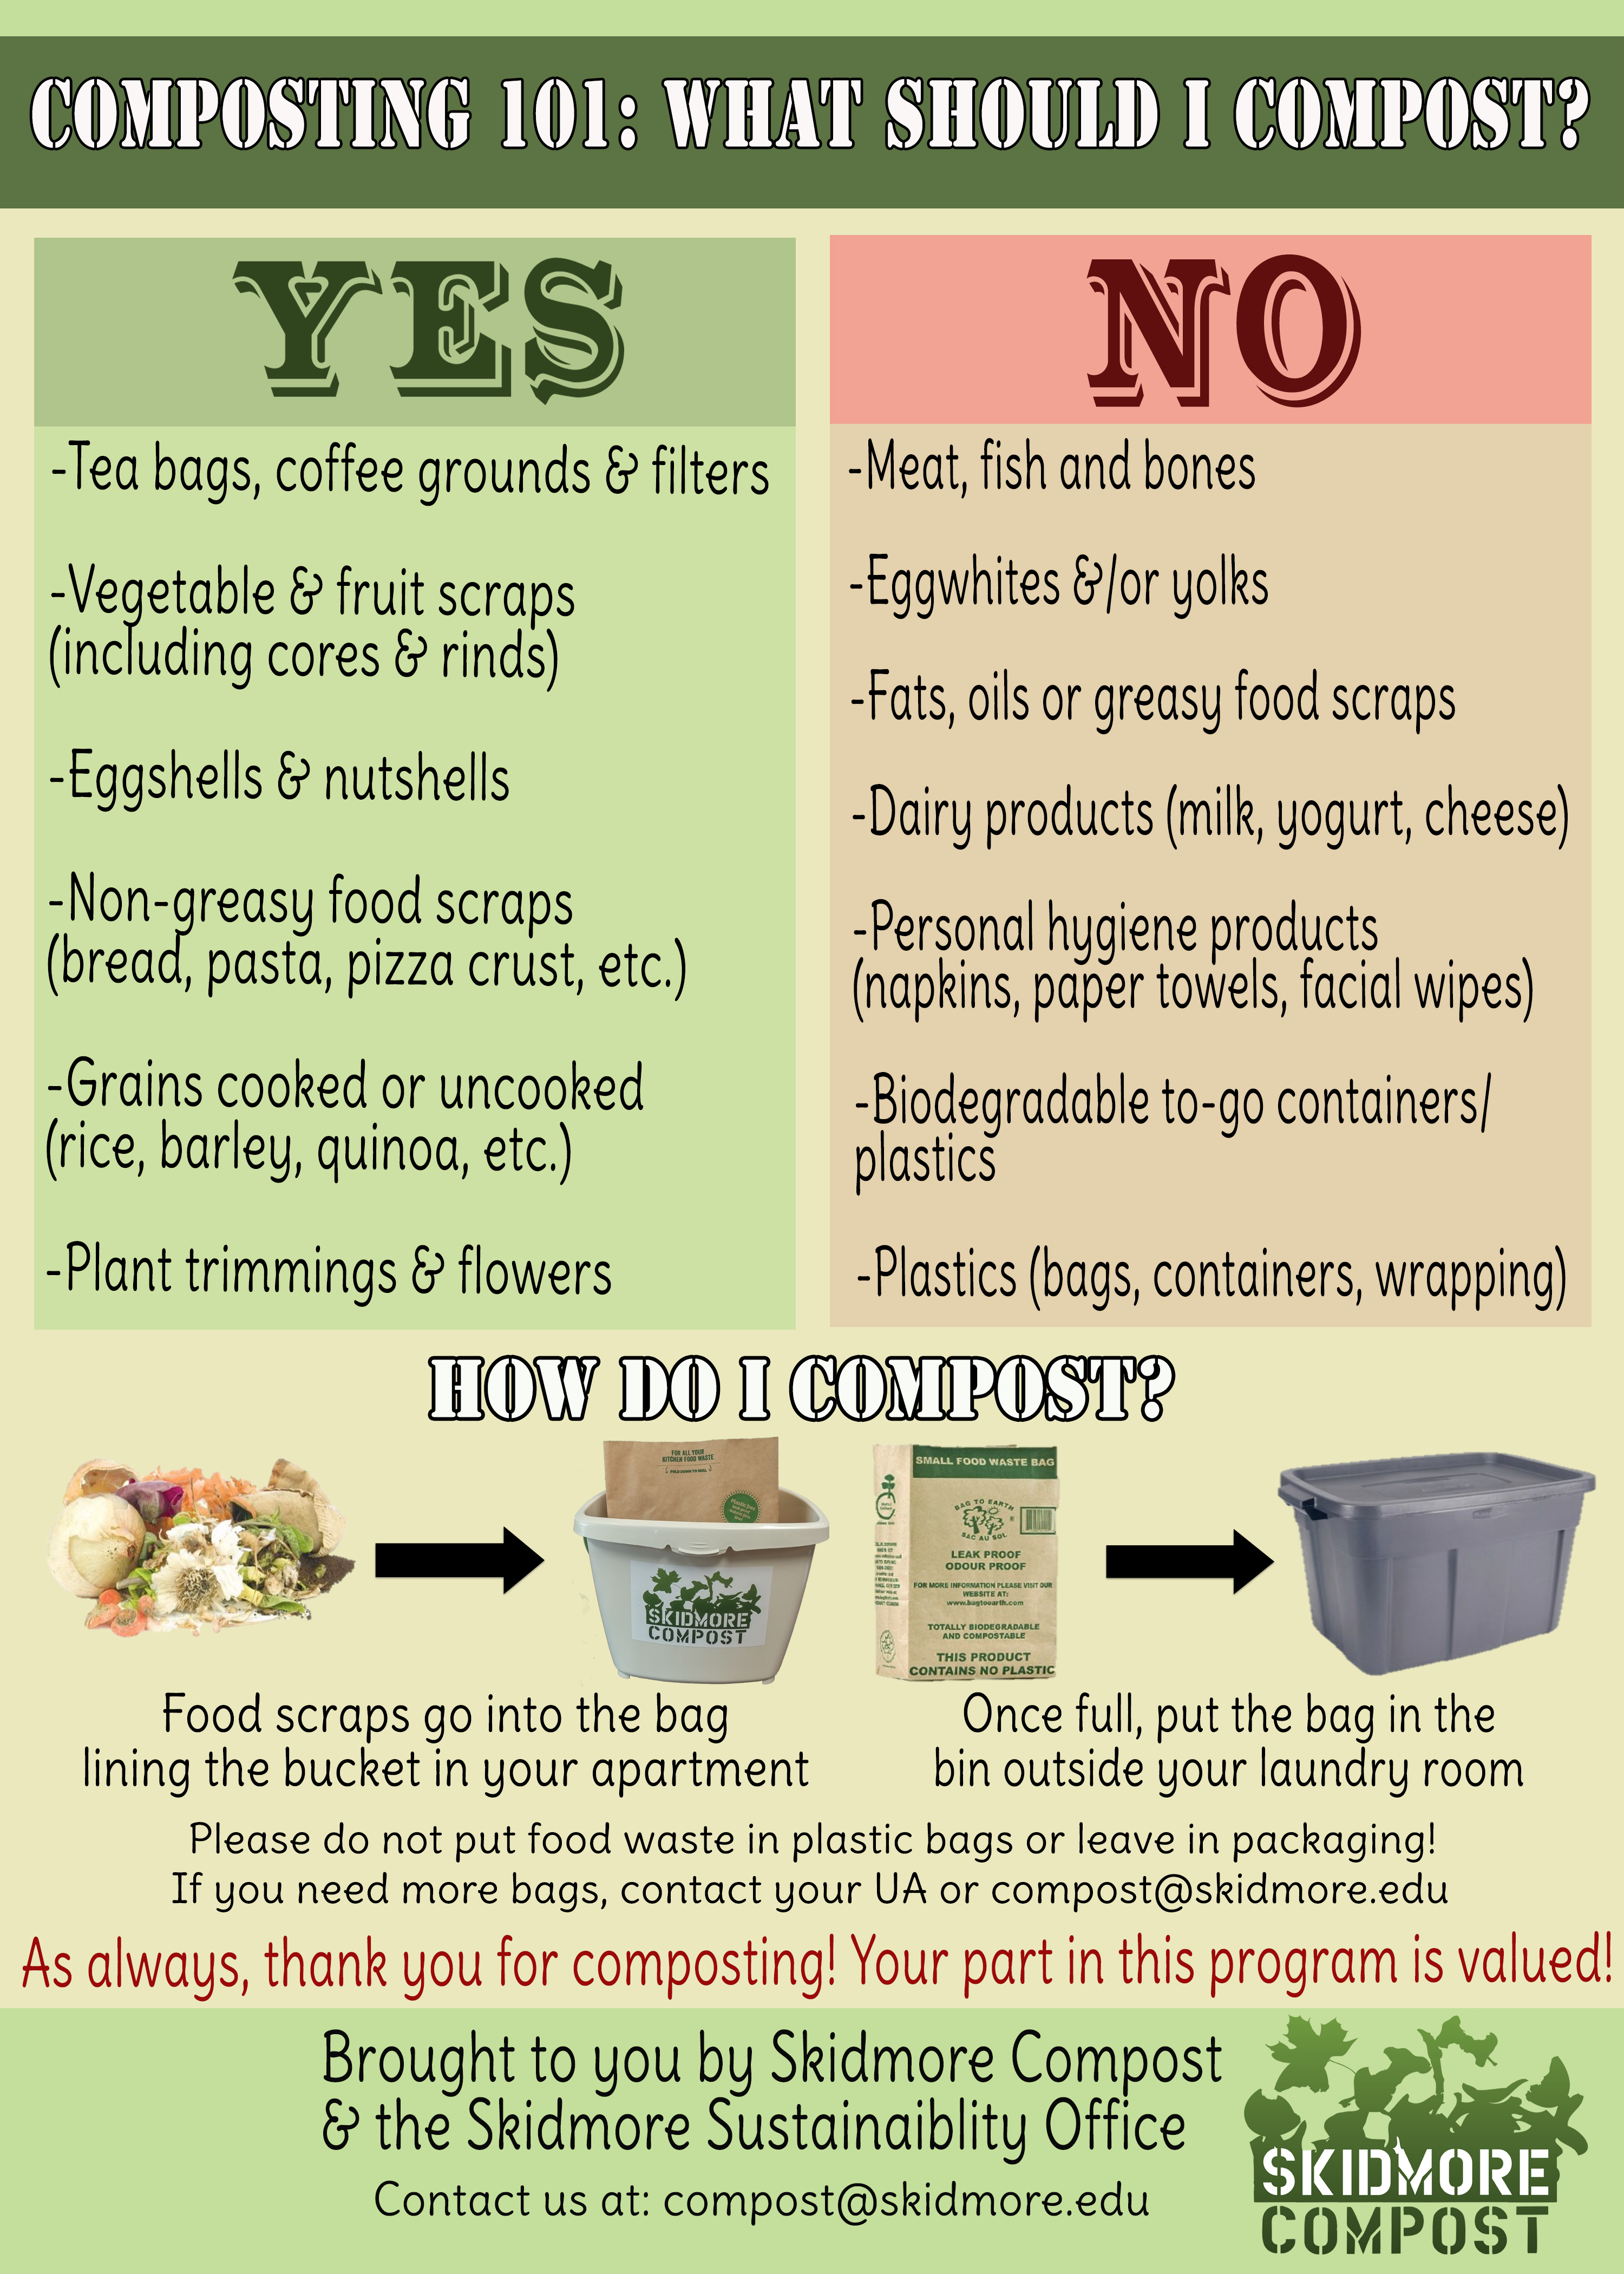 Image shows that users SHOULD compost veggie waste and coffee grounds and SHOULD NOT compost dairy products or meats.